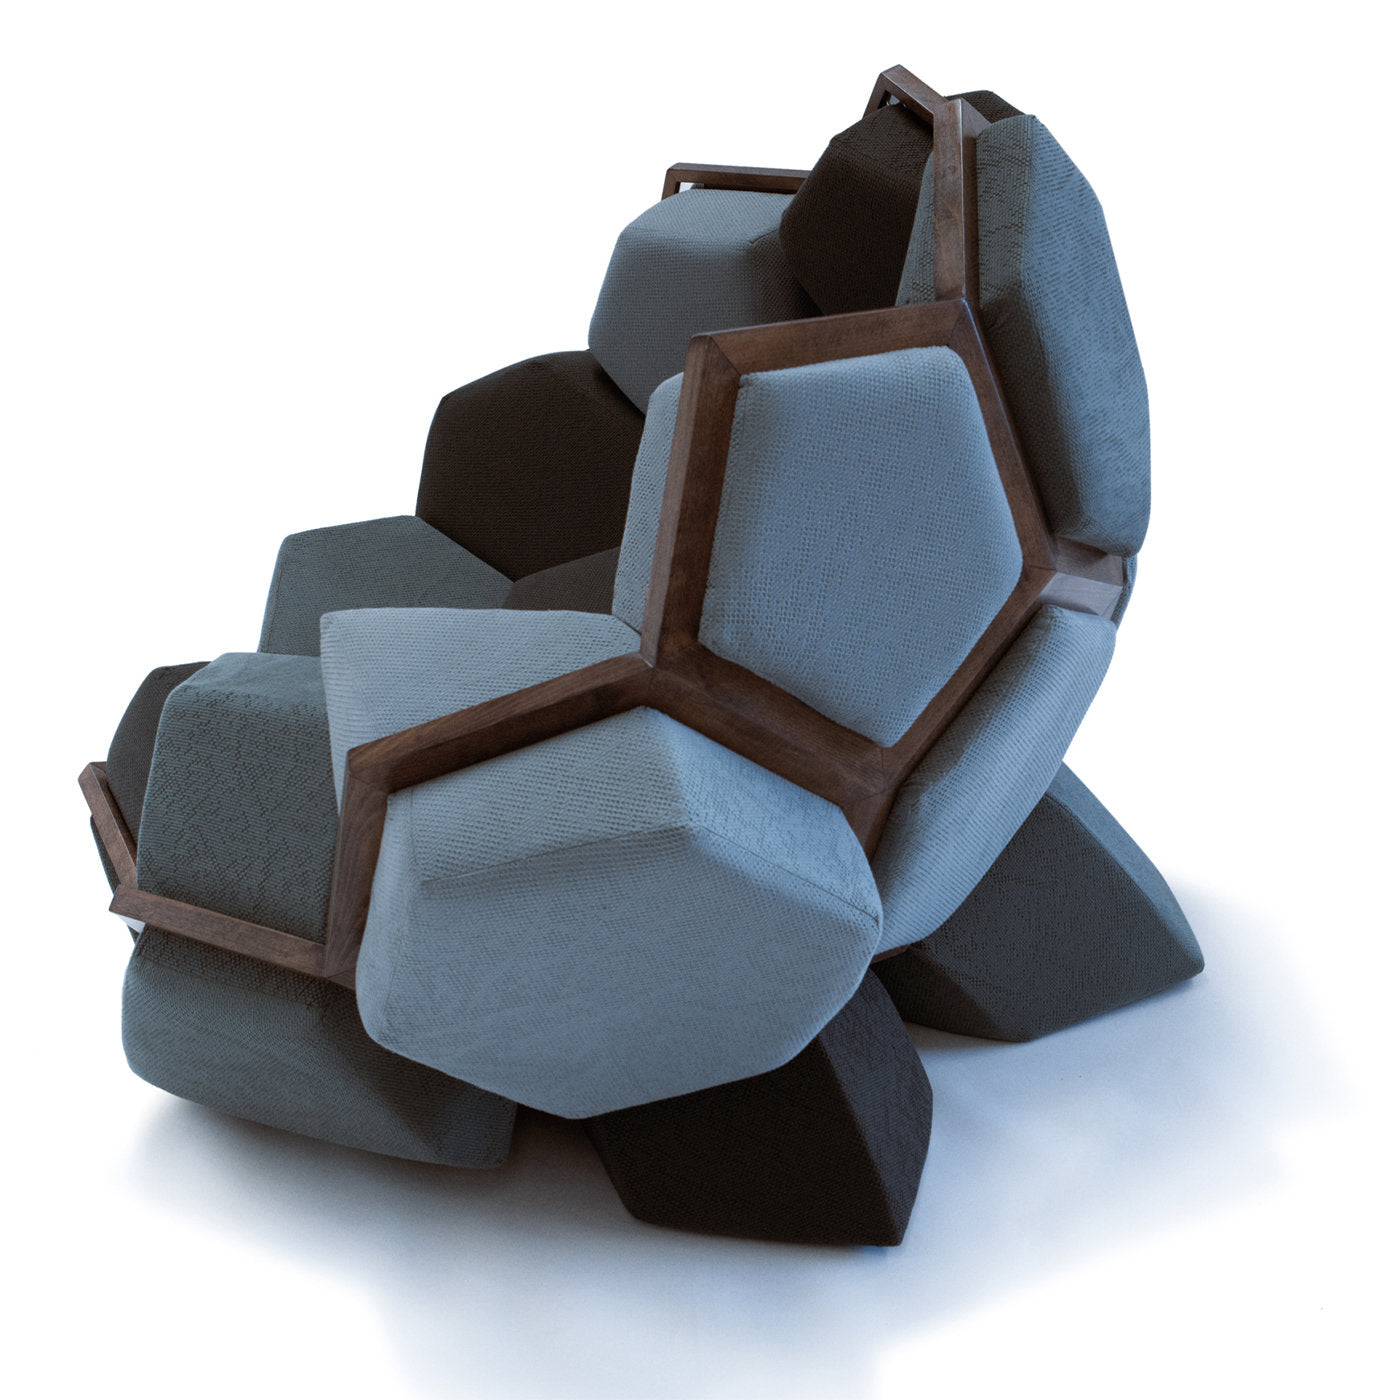 Quartz Ecological Armchair by CRTL ZAK and Davide Barzaghi - Alternative view 1